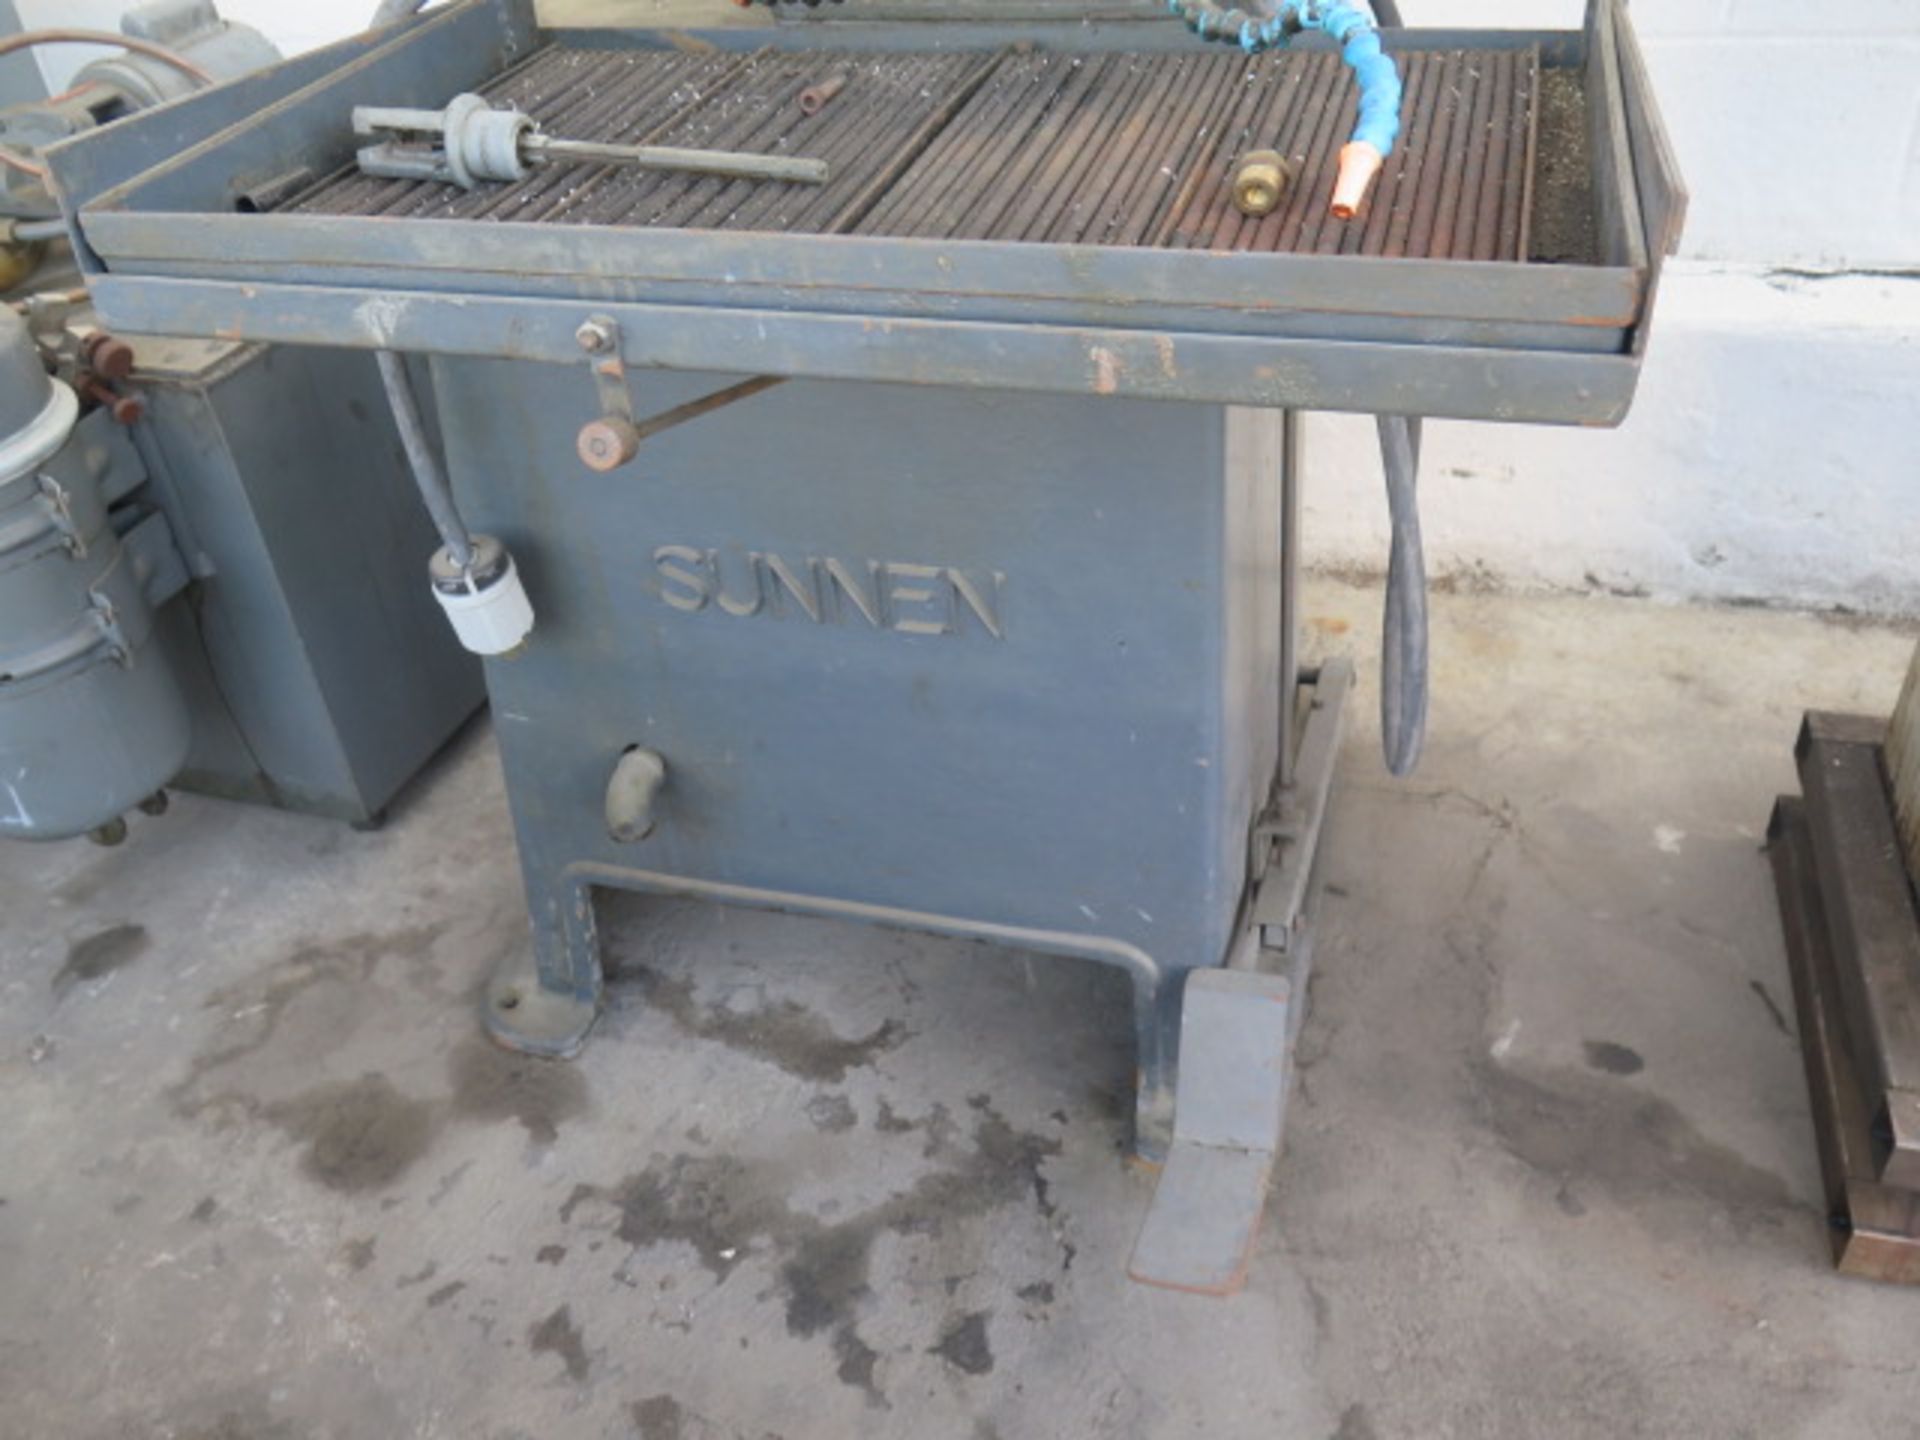 Sunnen mdl. MBB-1290 Honing Machine (SOLD AS-IS - NO WARRANTY) - Image 4 of 6